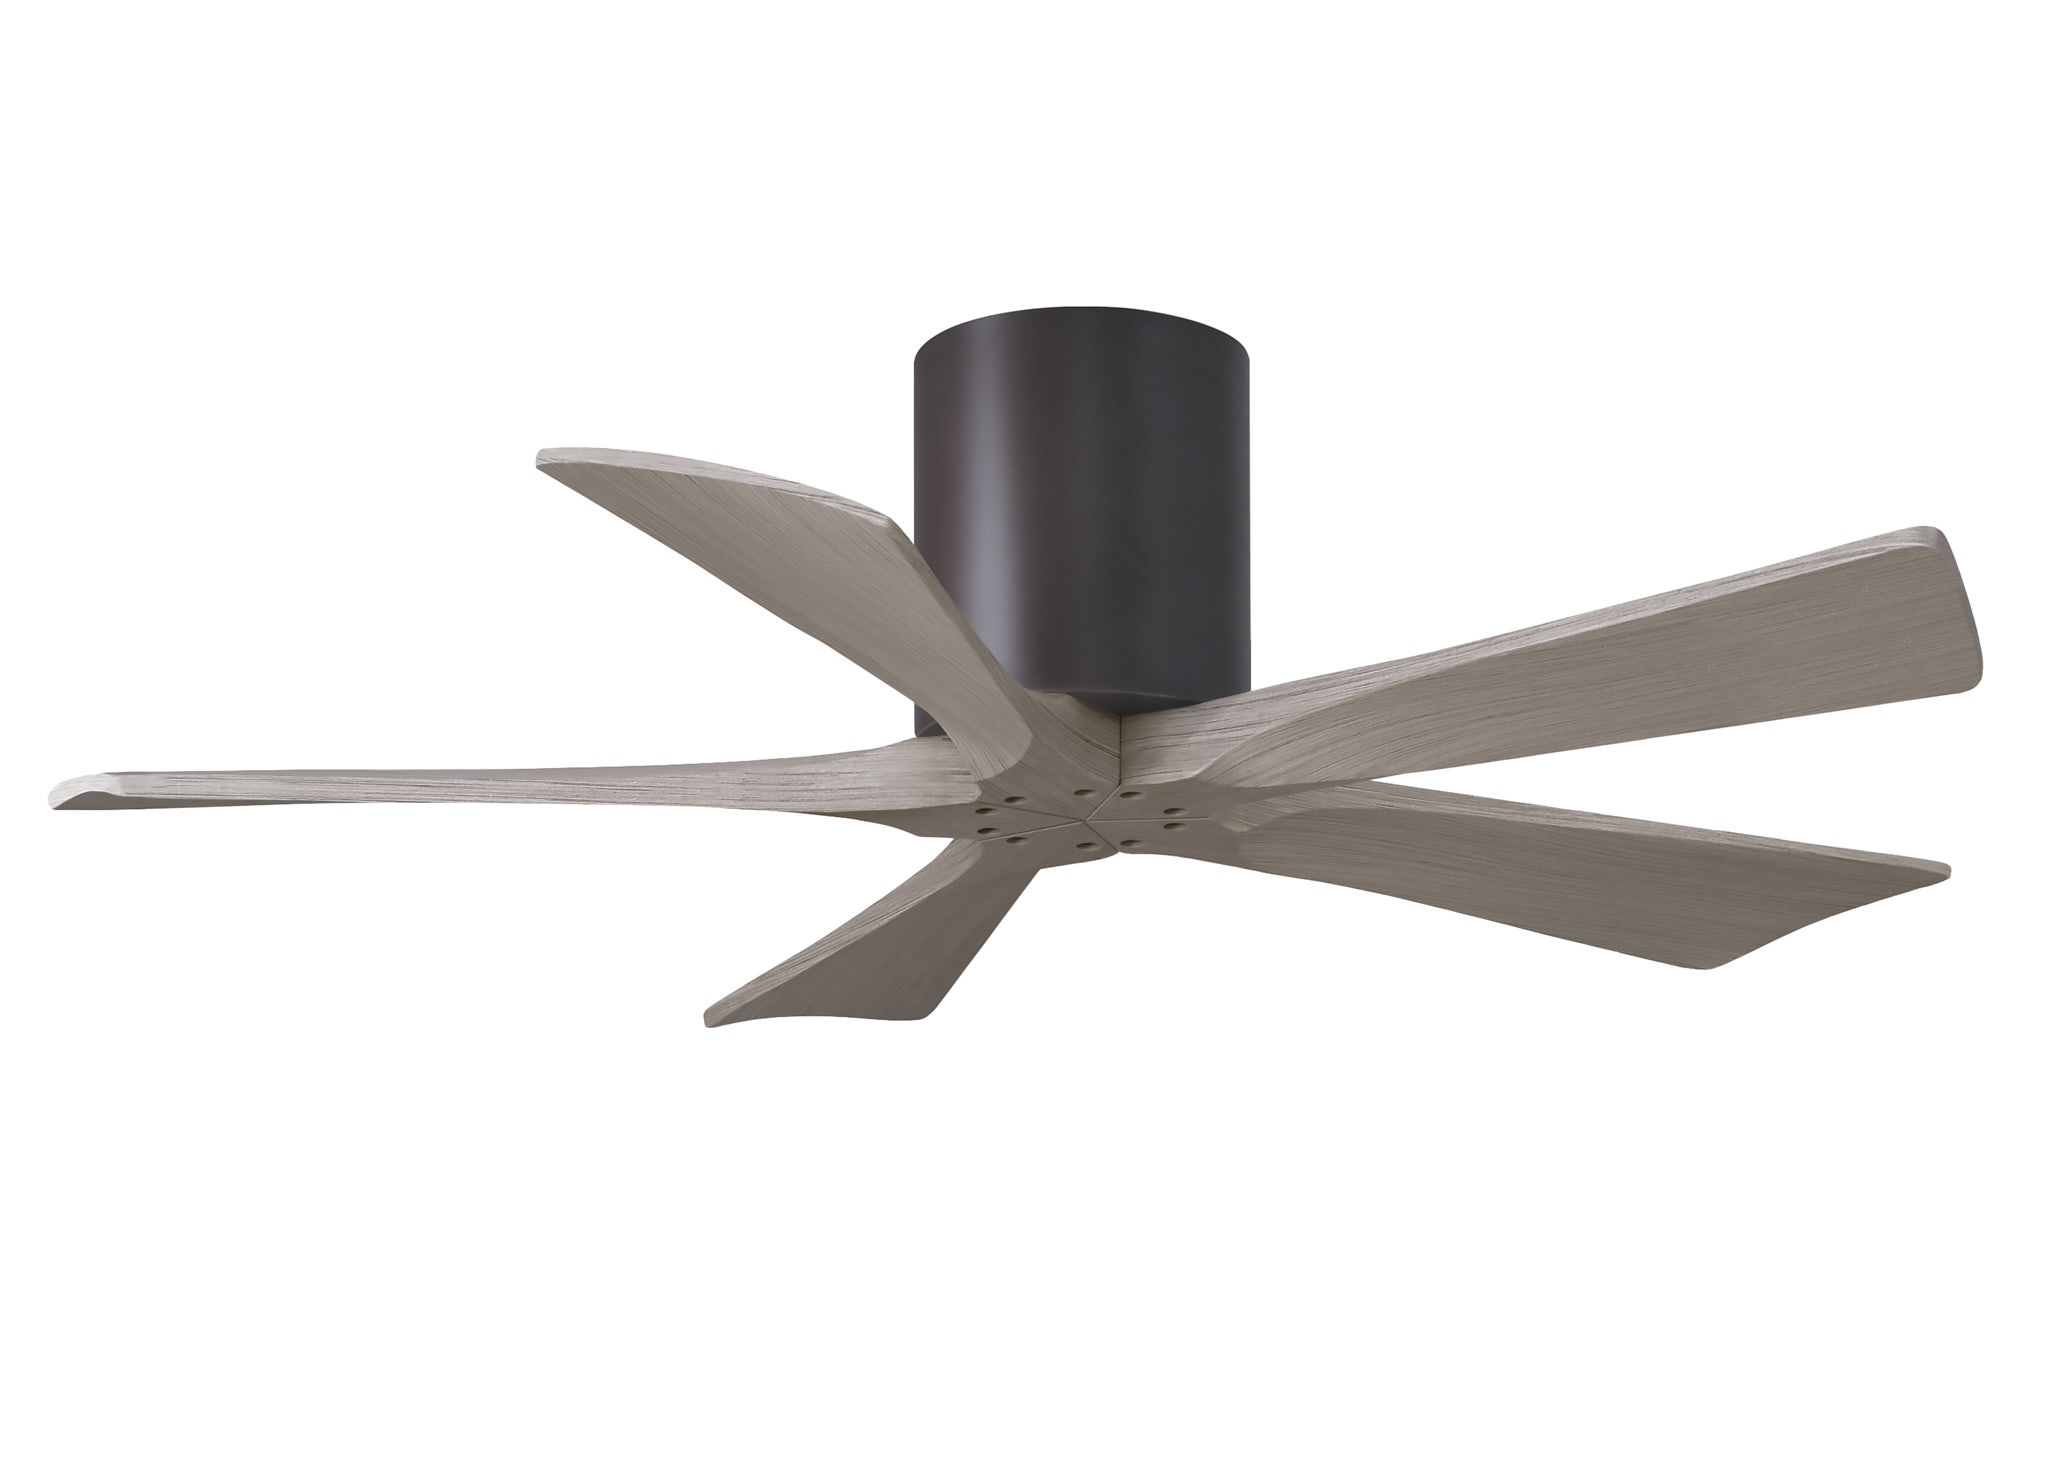 Irene-5H 6-speed ceiling fan in textured bronze finish with 42